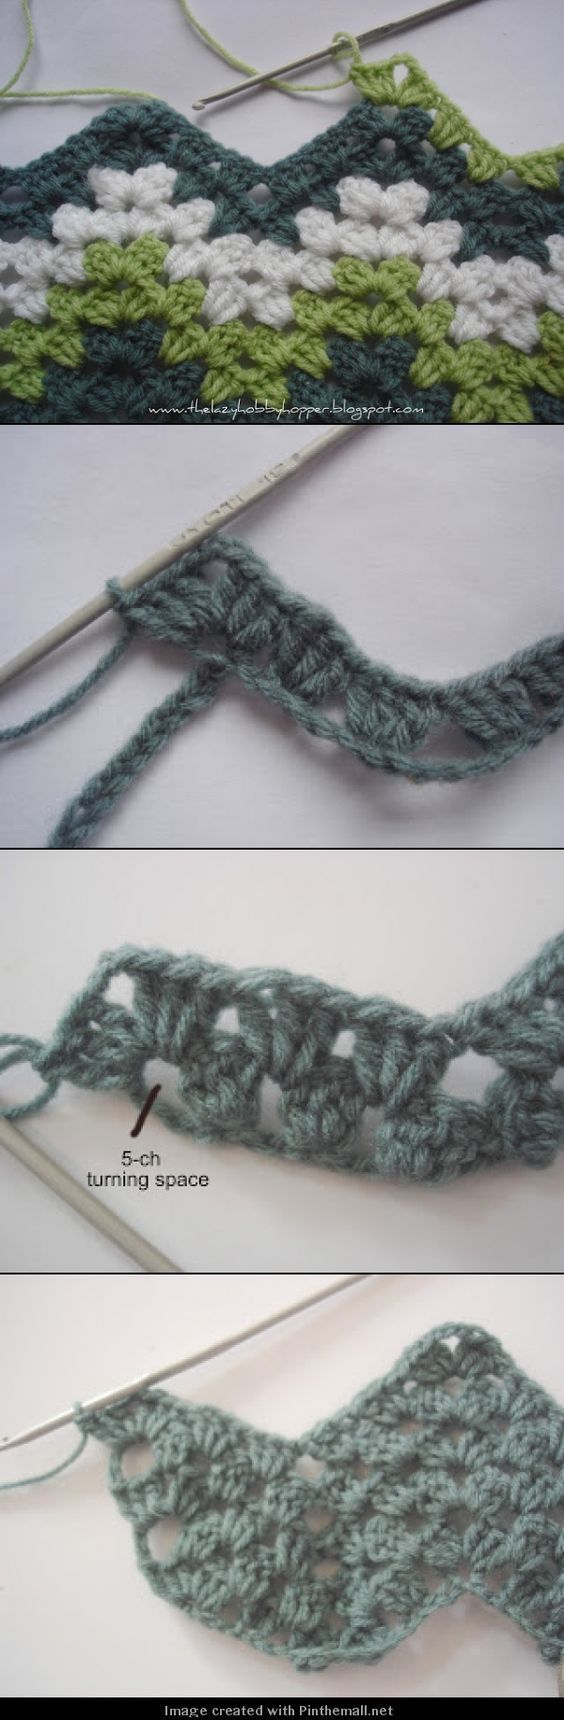 great step by step photo tutorial on granny ripple crochet: